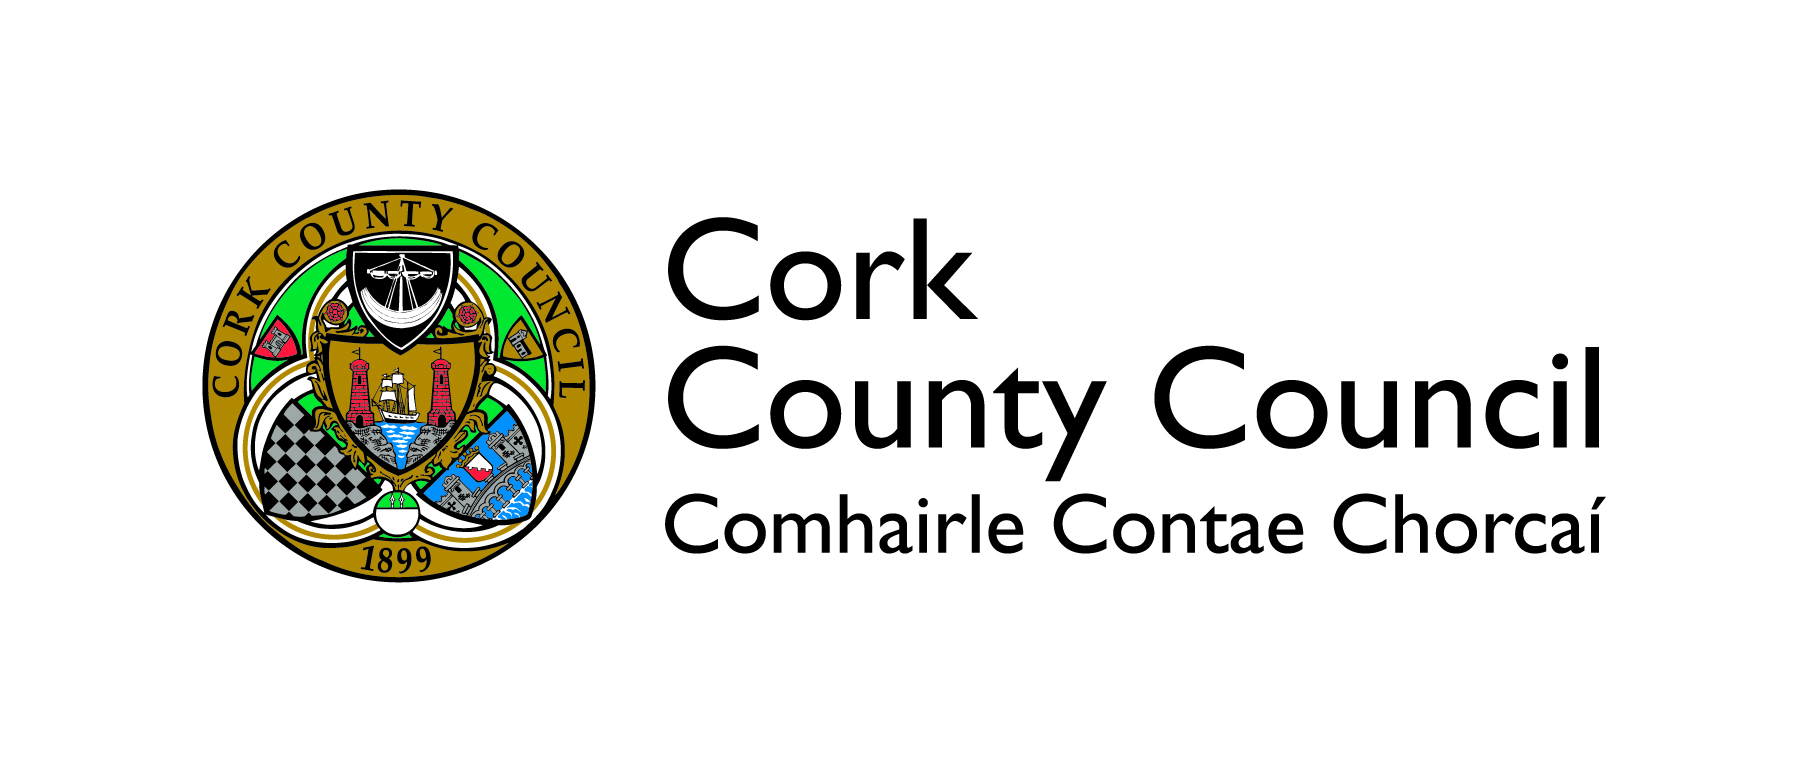 New Arts Funding Measures for 2018 Announced by Cork County Council